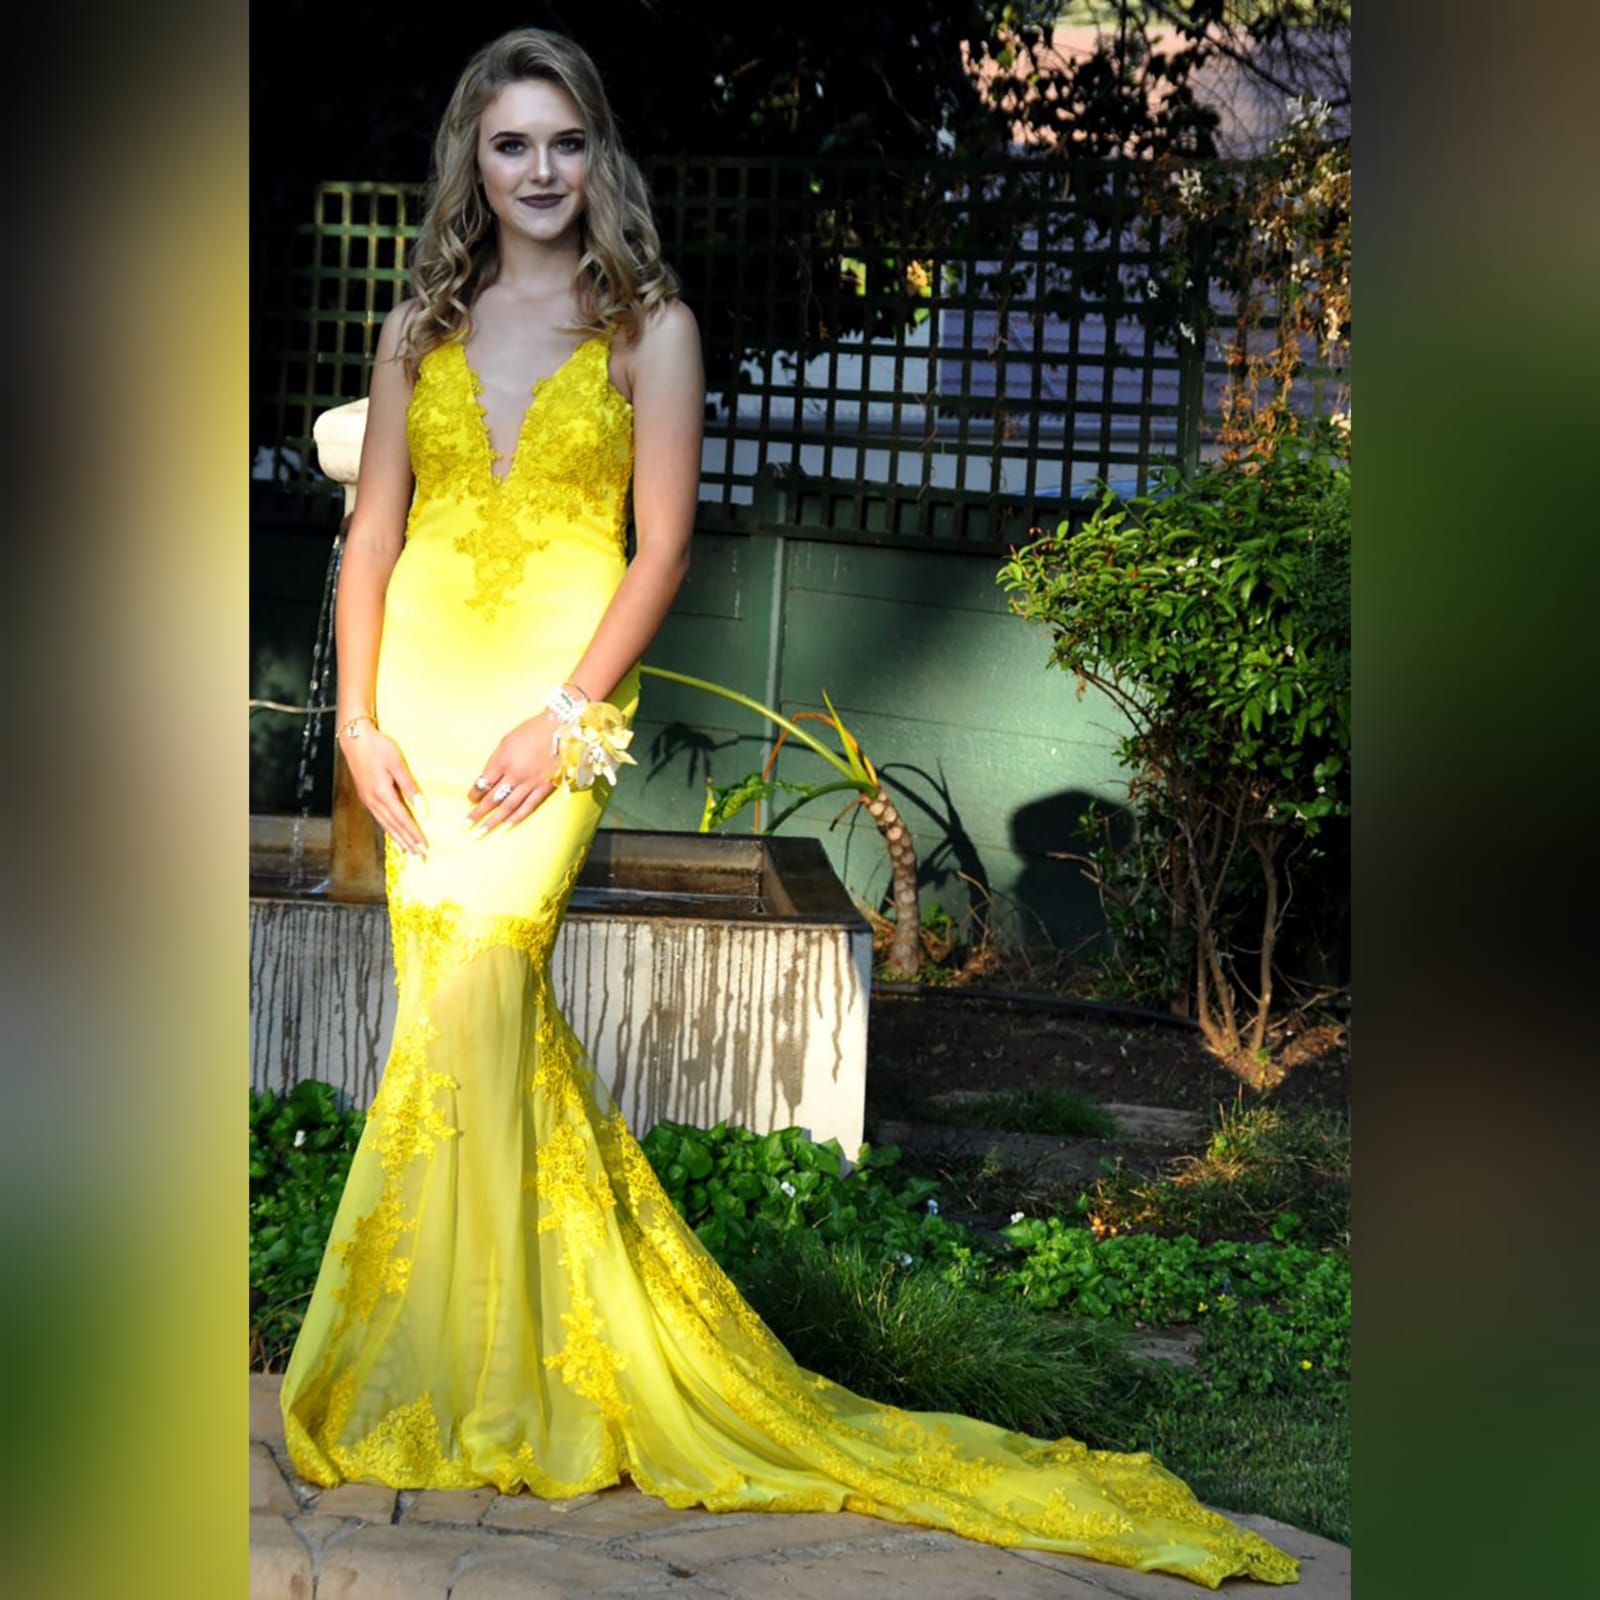 Canary yellow lace soft mermaid prom dress 8 canary yellow, lace, soft mermaid prom dance dress with sheer legs, detailed with lace. With an illusion open back.